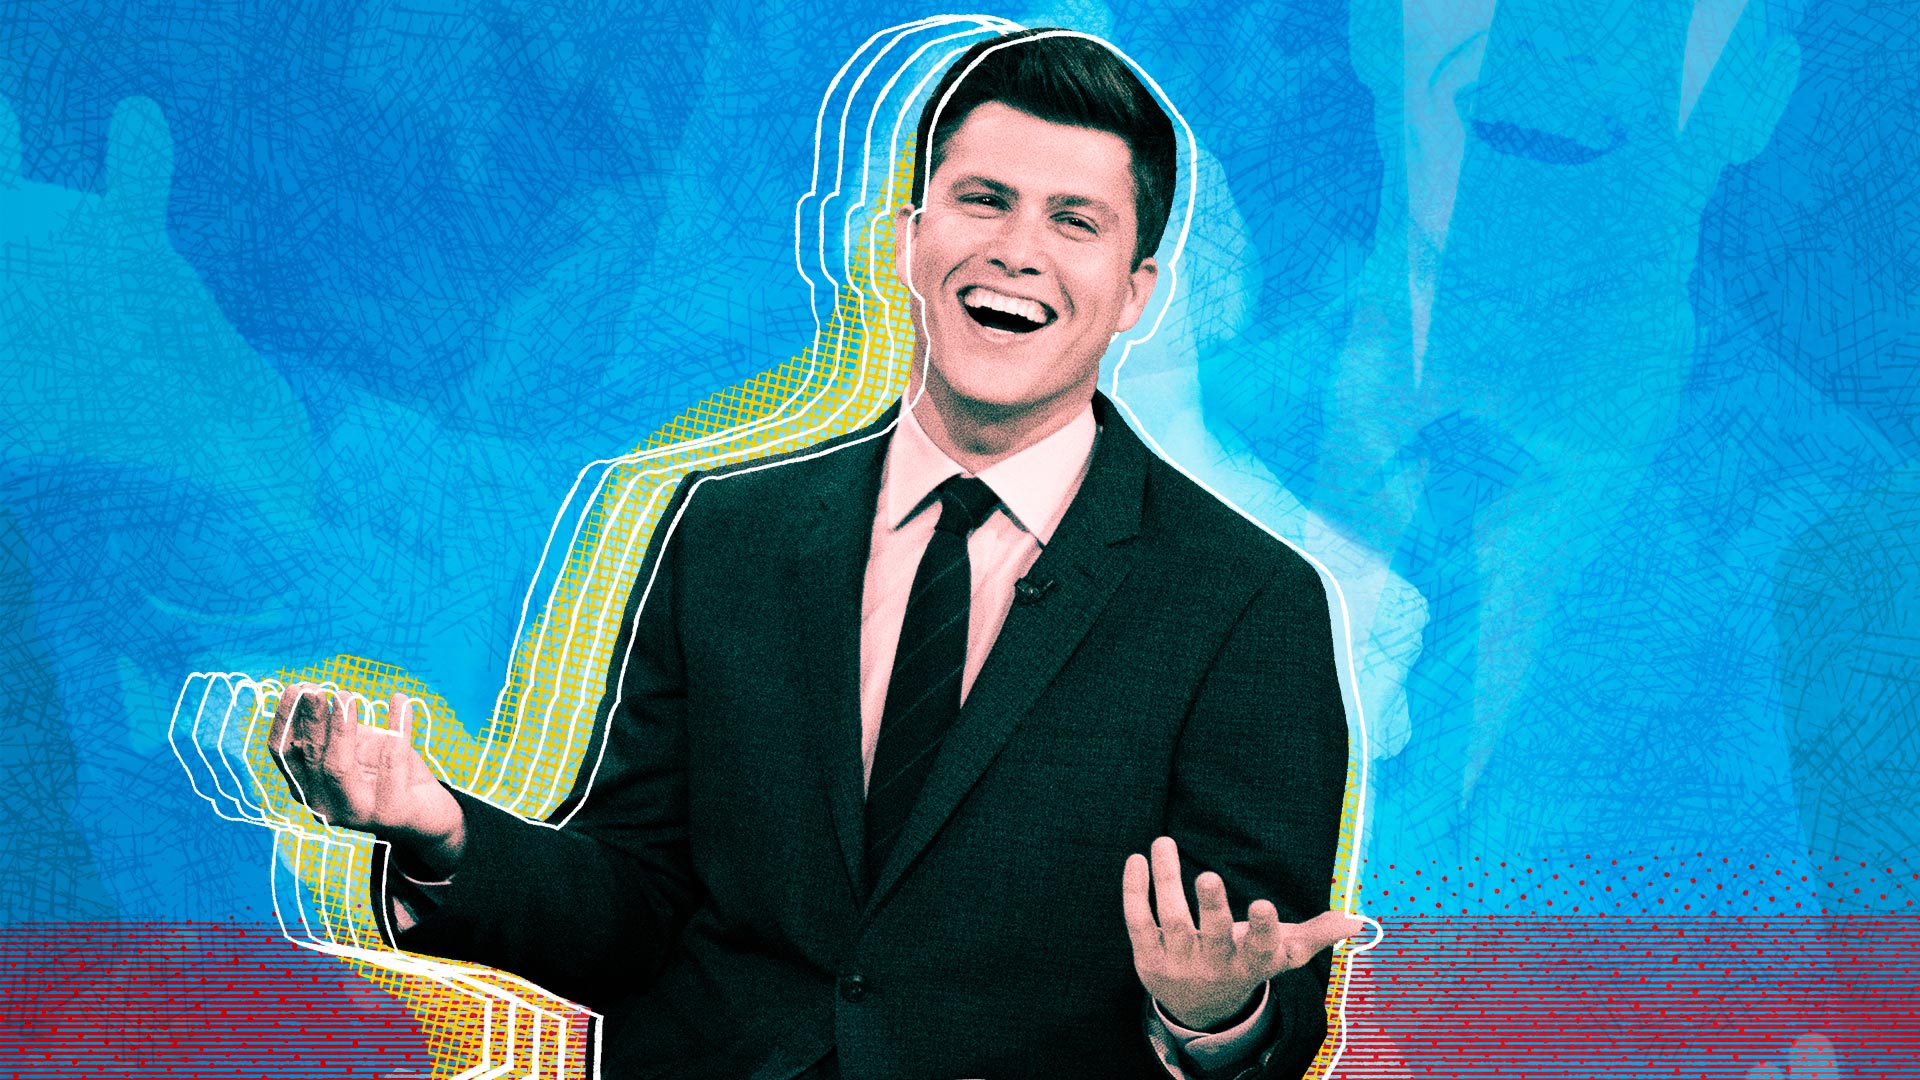 Actor and comedian Colin Jost, this year’s SEE Homecoming Comedy Show headliner, will take the stage in Ritchie Coliseum for two shows on Oct. 16. Photo by NBC/Getty Images; photo illustration by Valerie Morgan.